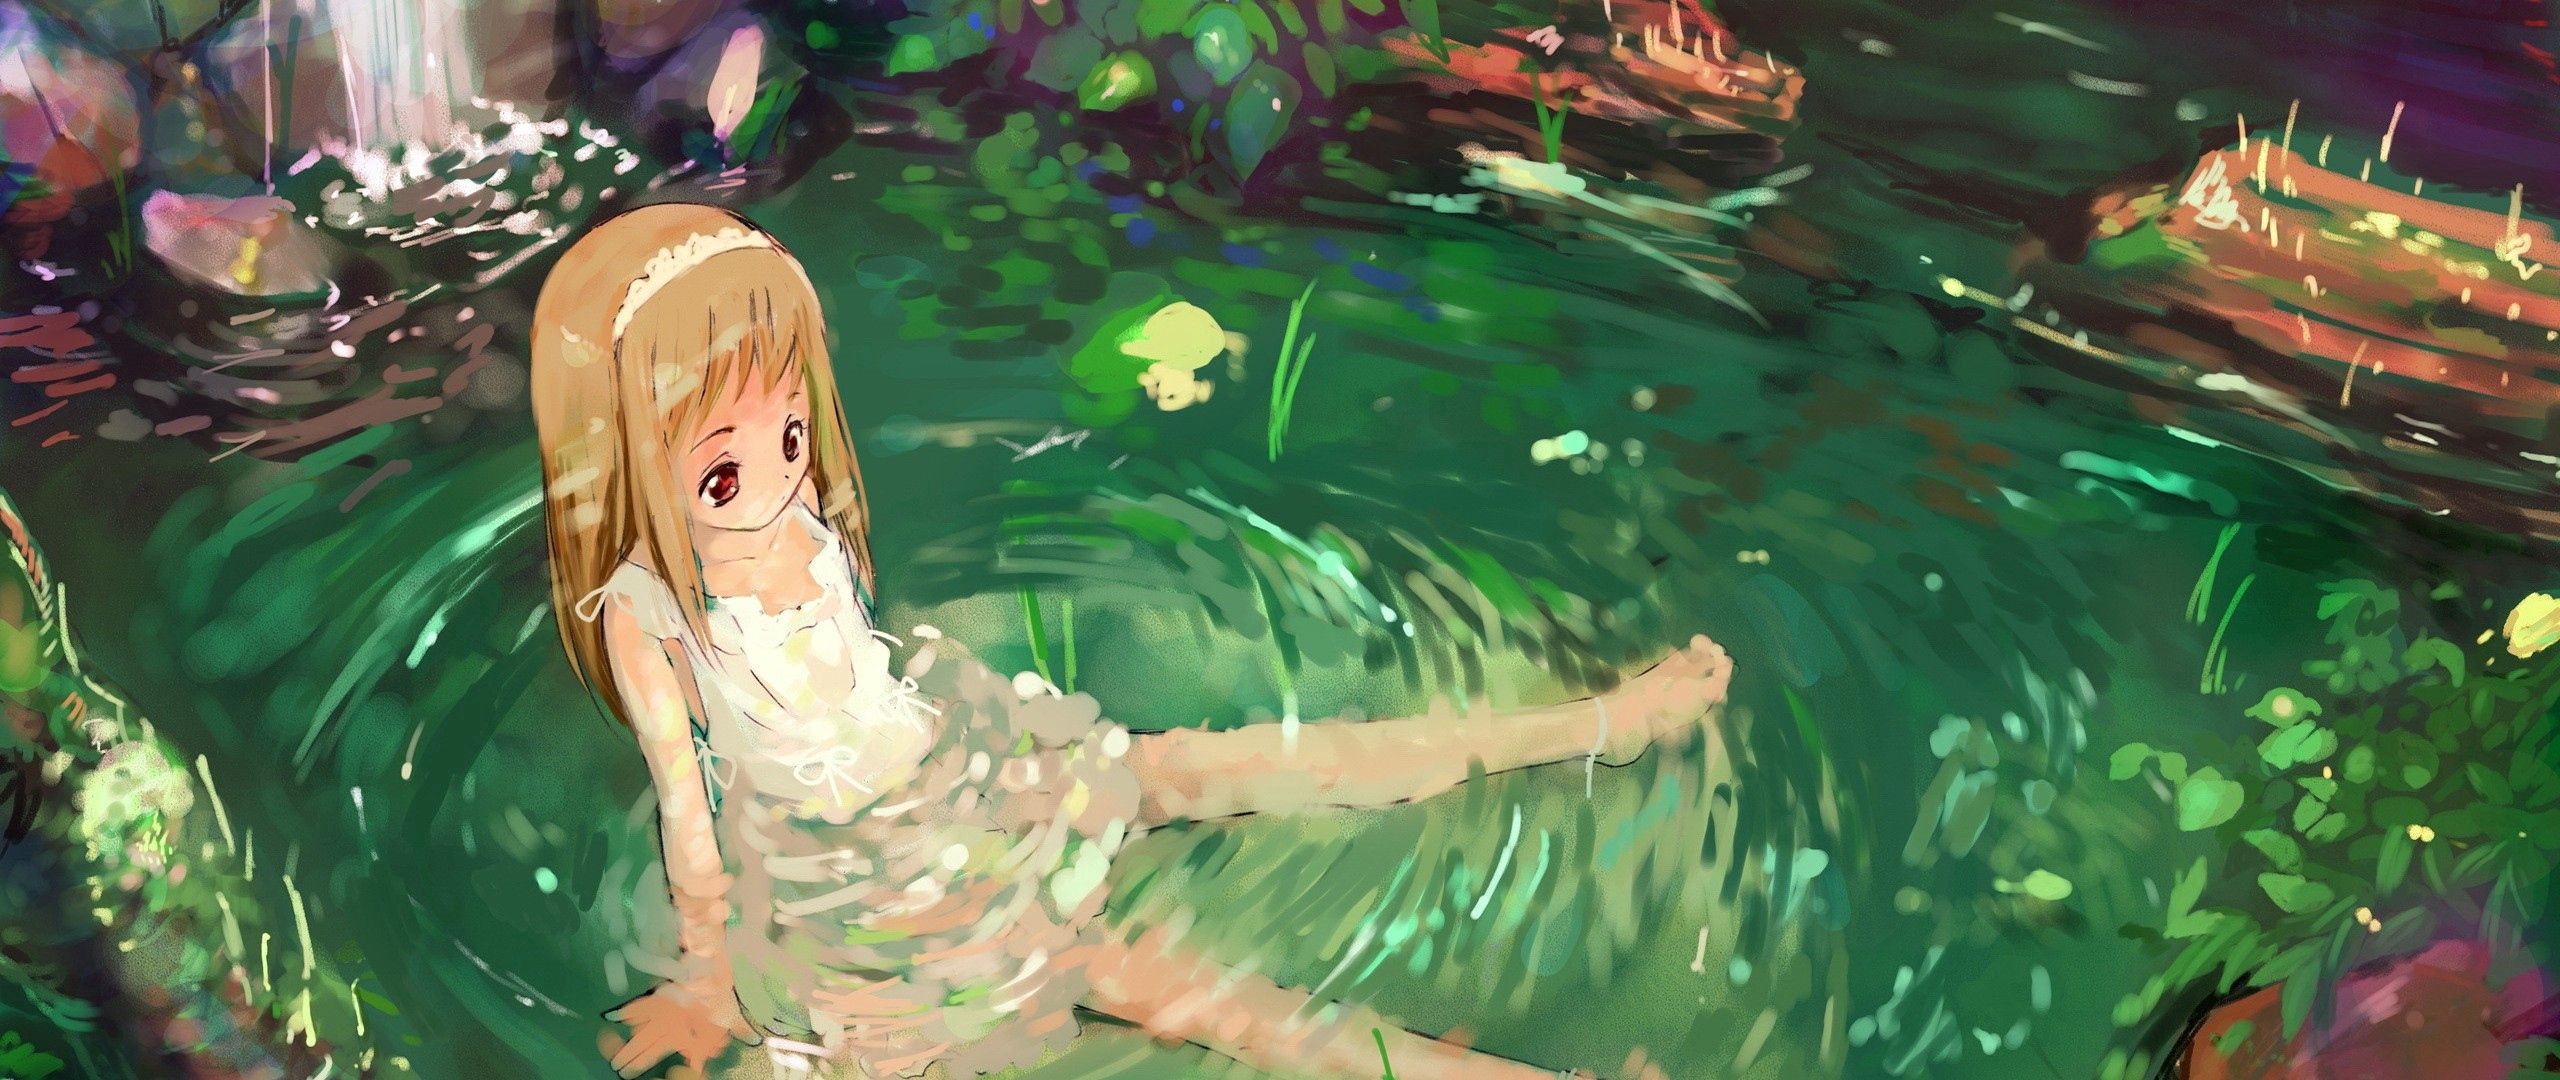 Download Wallpaper 2560x1080 Anime Girl Nature Water Sadness Dual Wide 1080p Hd Background